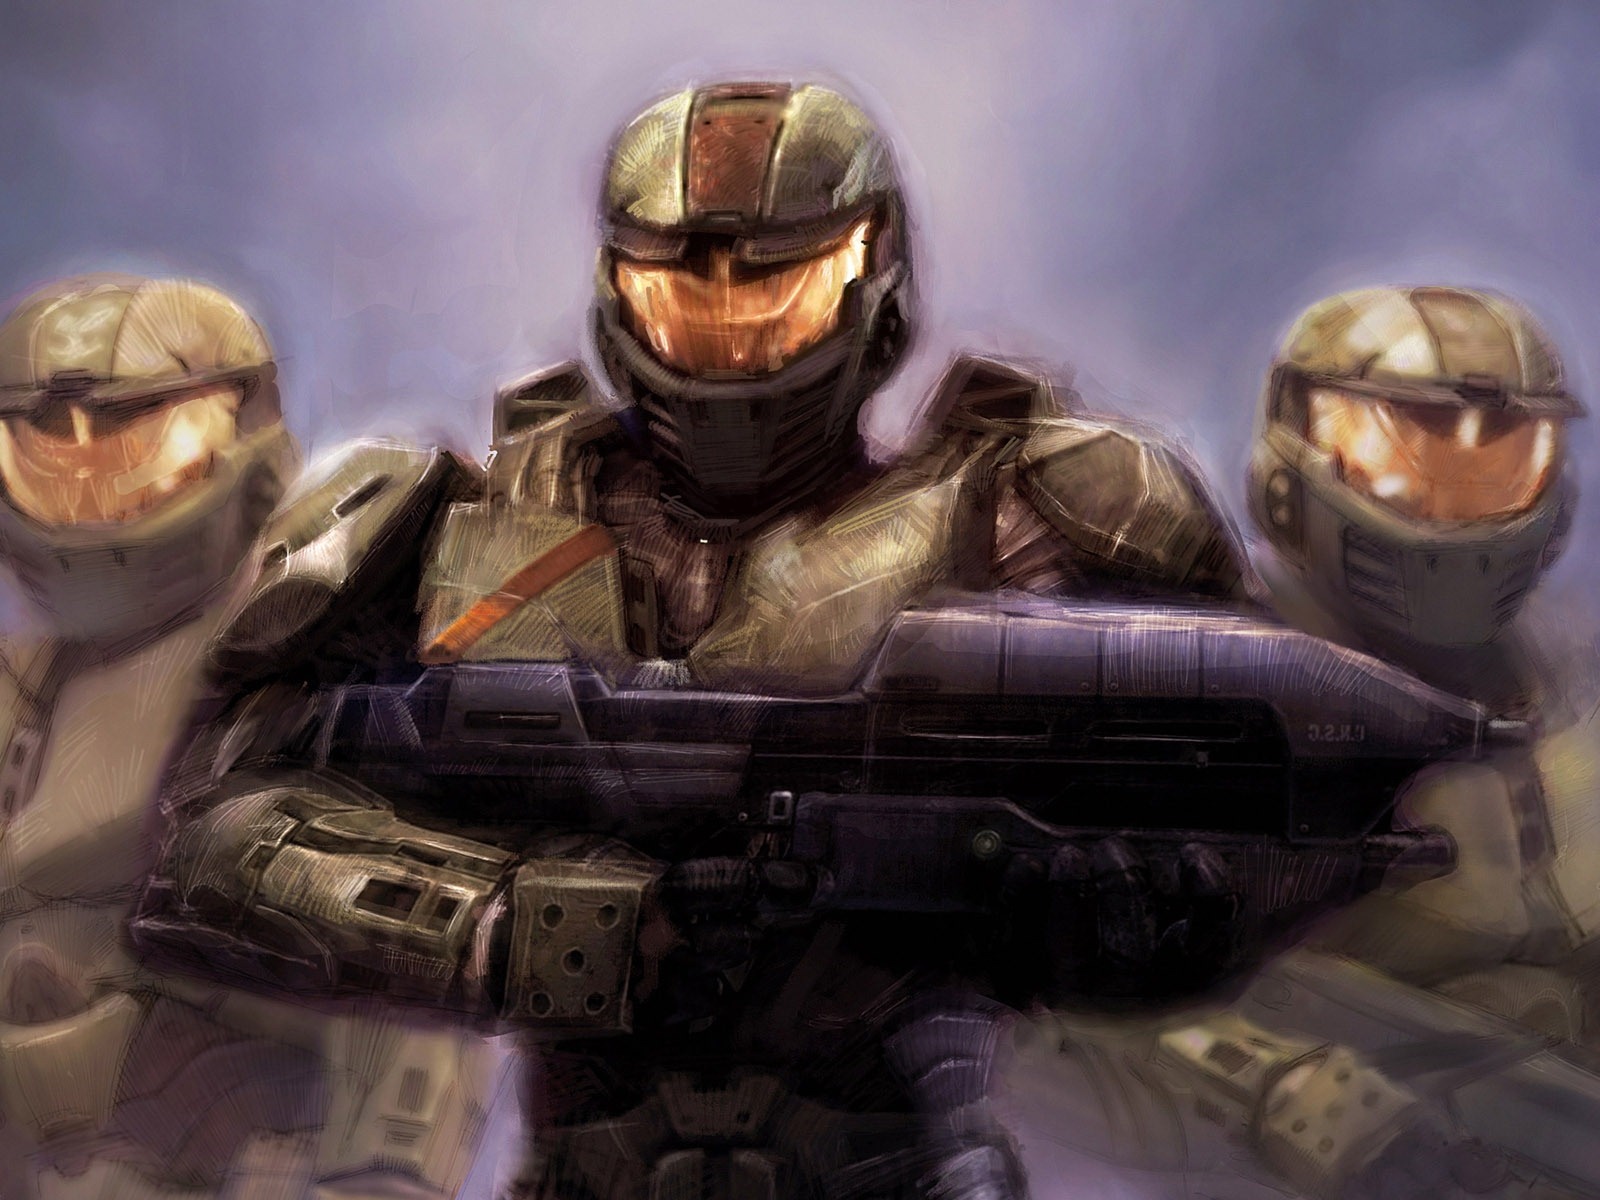 Halo game HD wallpapers #16 - 1600x1200